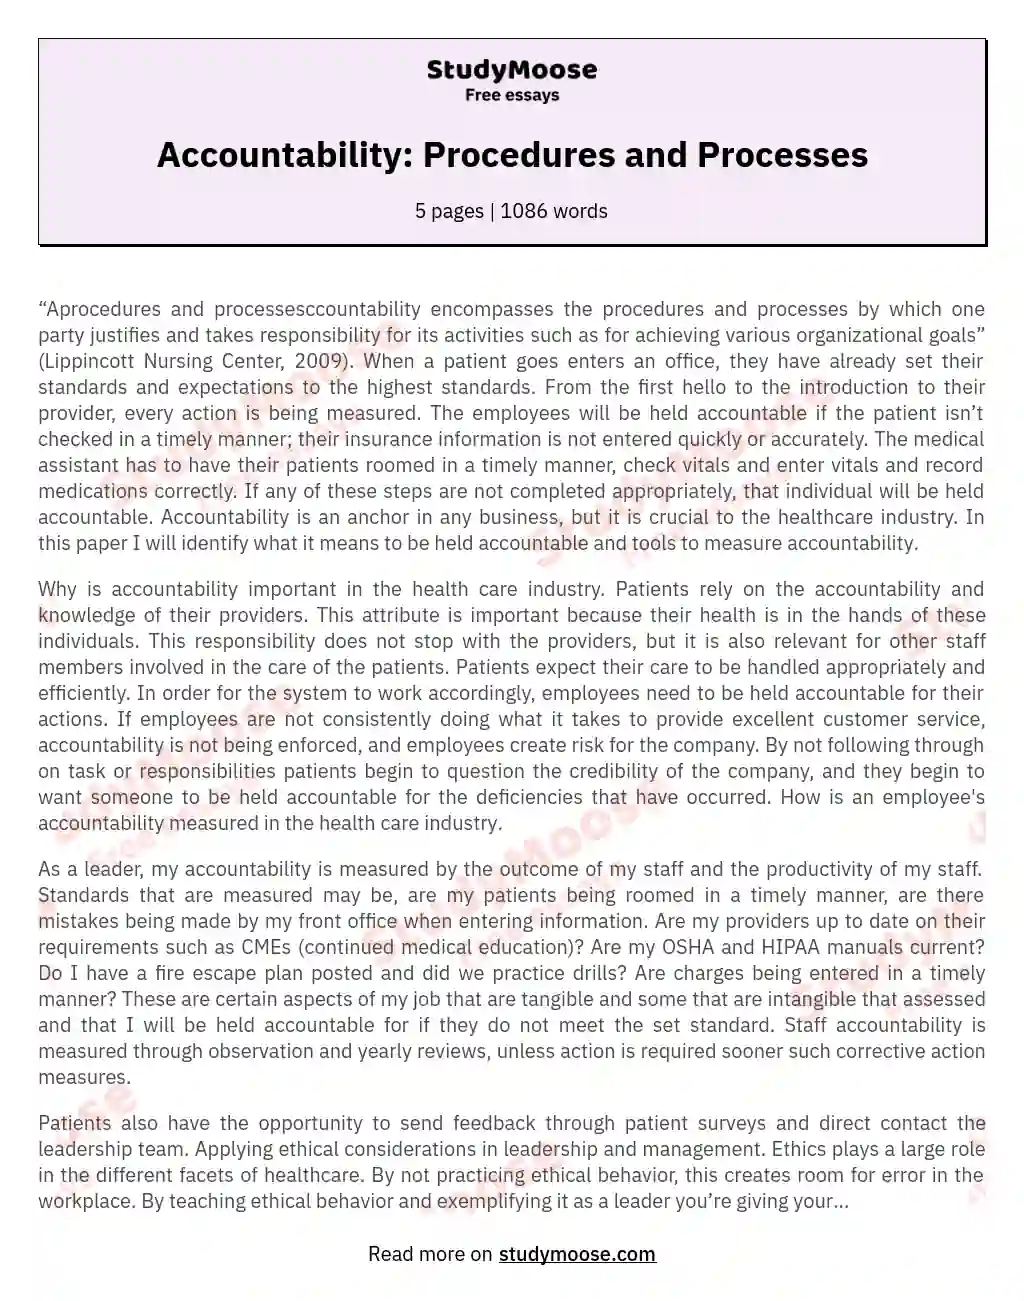 Accountability: Procedures and Processes